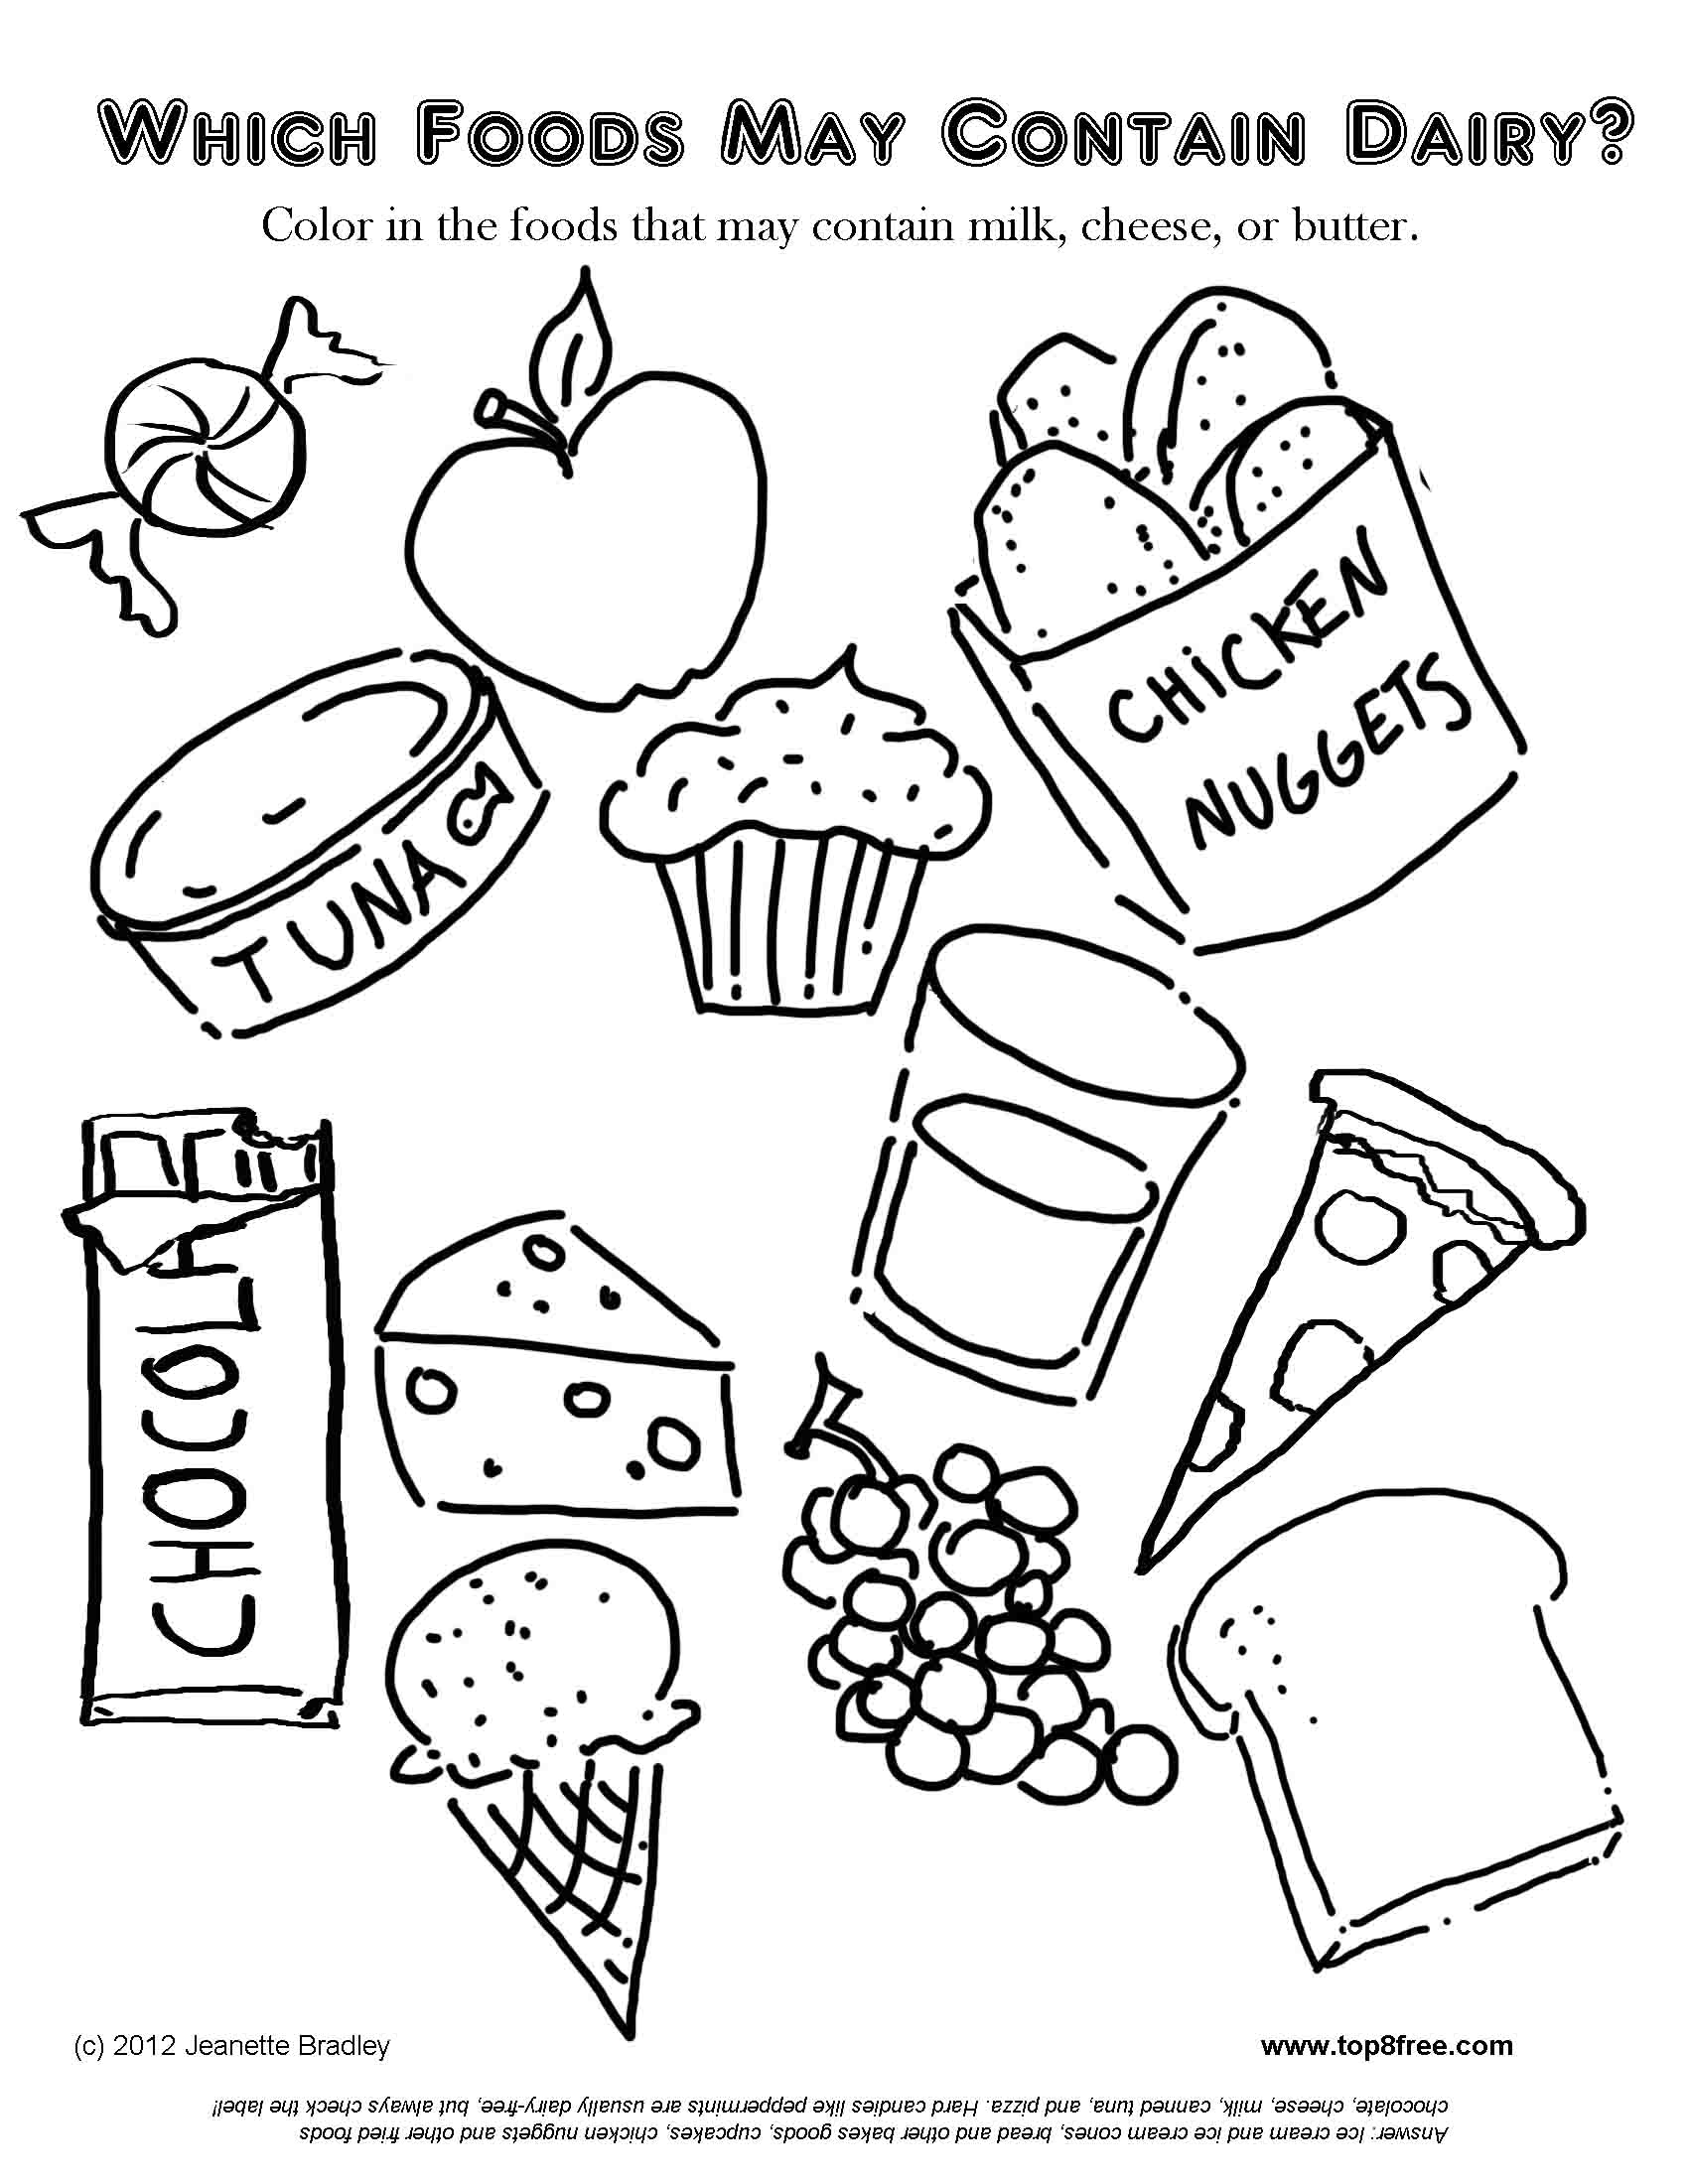 8 Pics of Food Group Coloring Pages - Dairy Food Coloring Pages ...